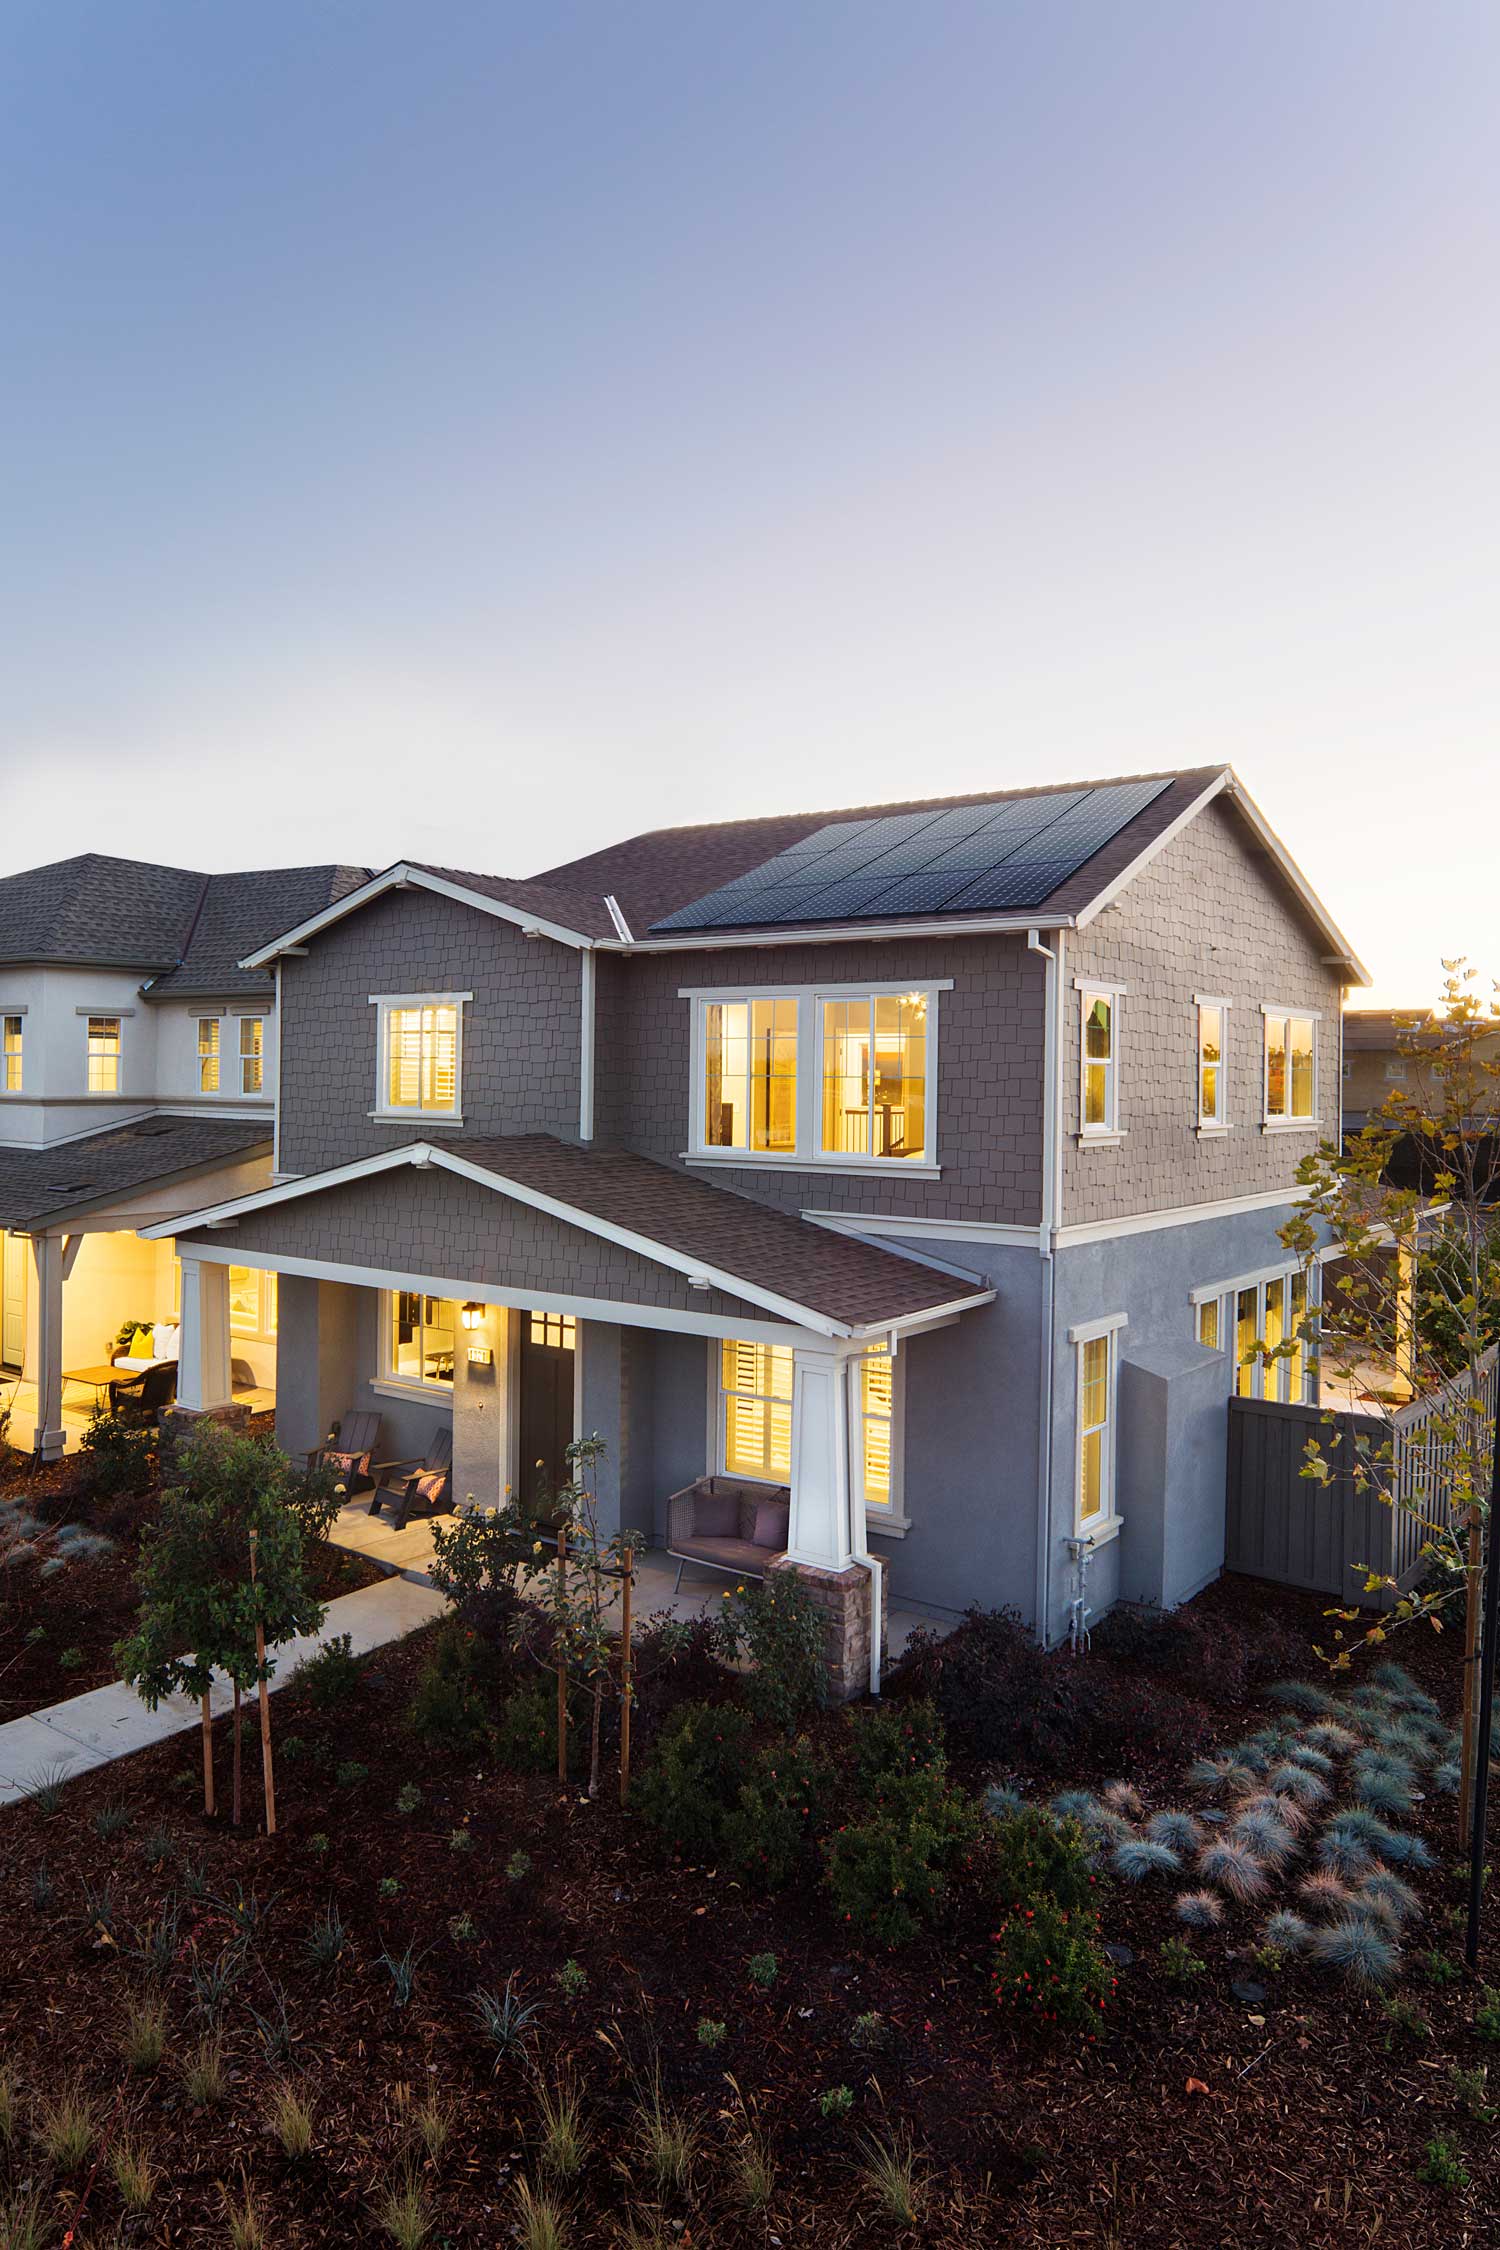 A grey house at dusk with lighting generating power from their solar panels with Solar Energy Partners - one of the top solar companies in South Carolina & Georgia.